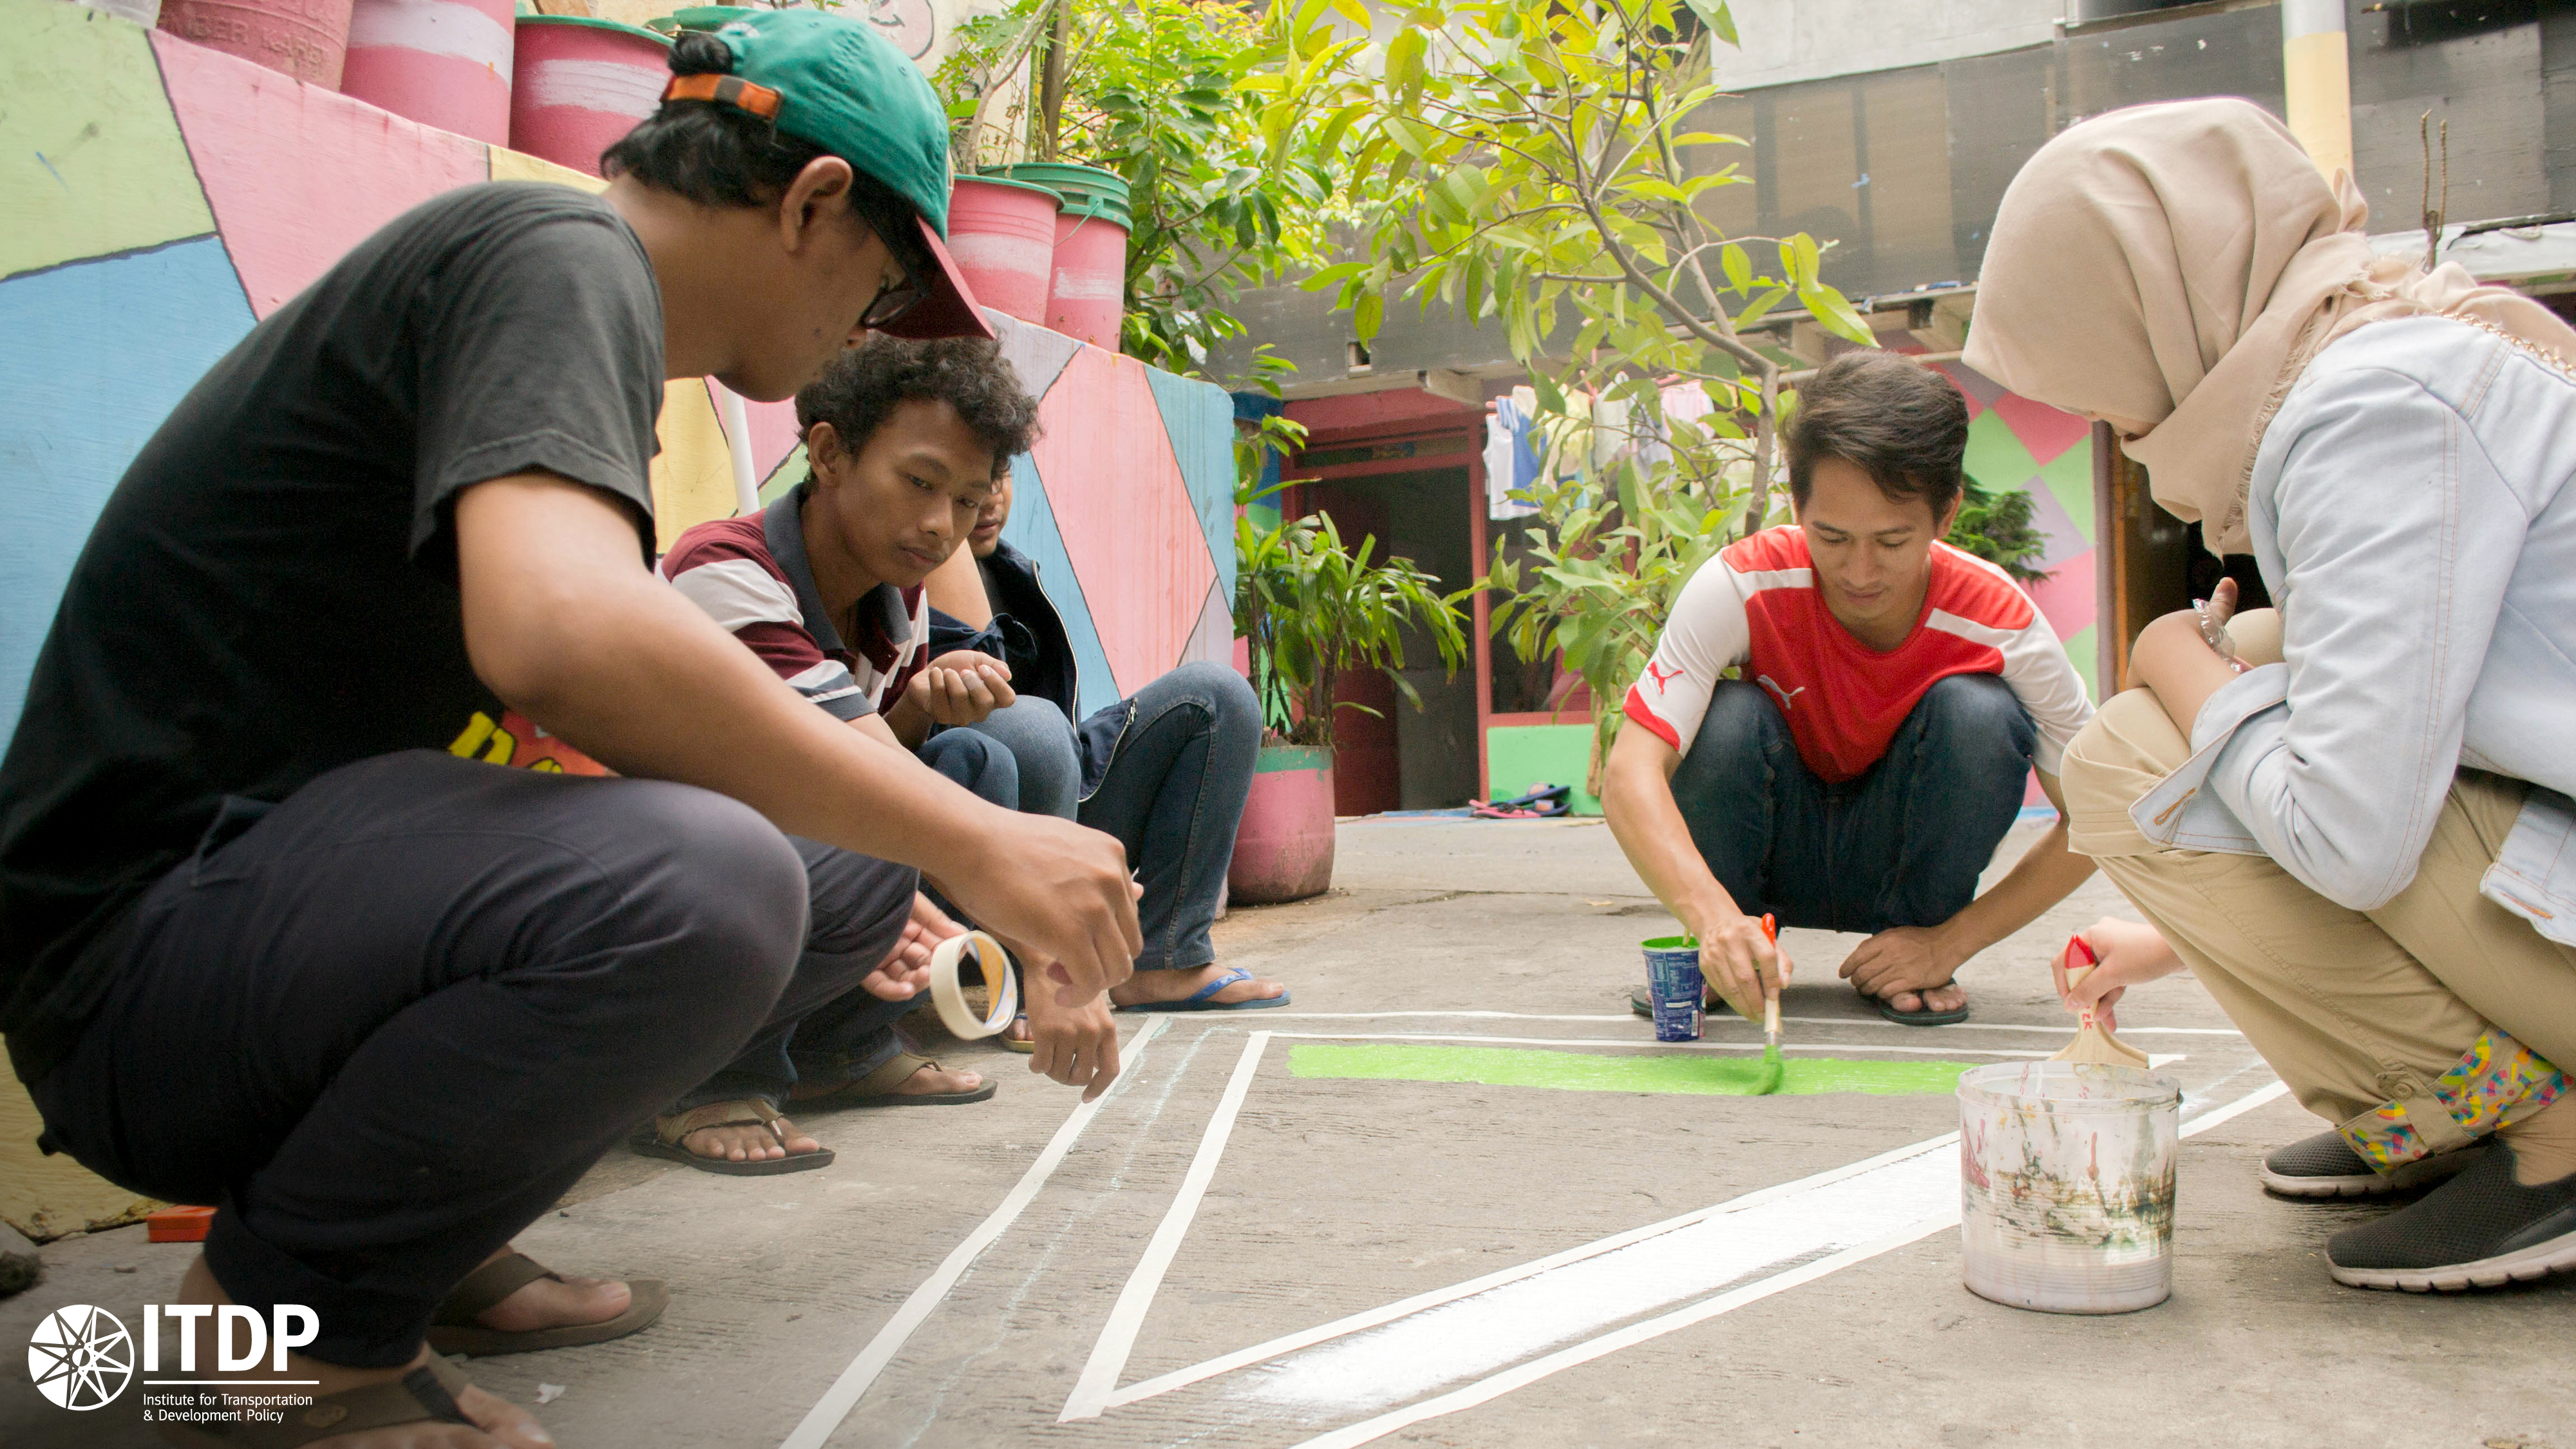 [WEBINAR] Jakarta's Urban Villages: A Community Based Approach to Urban Mobility